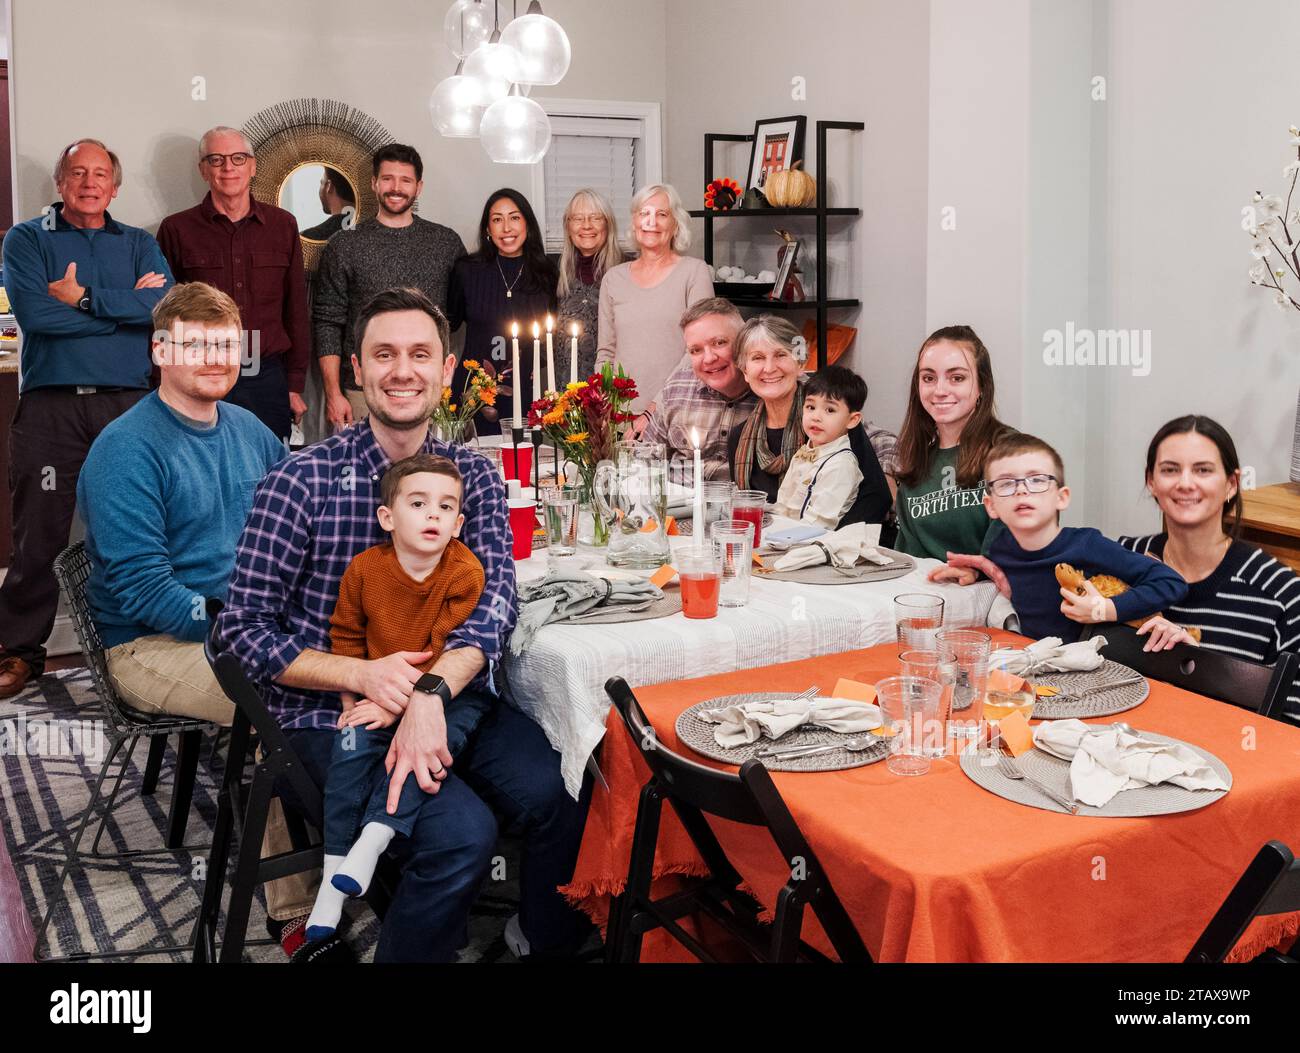 Interior group portrait of extended family gathered for Thanksgiving Day meal Stock Photo